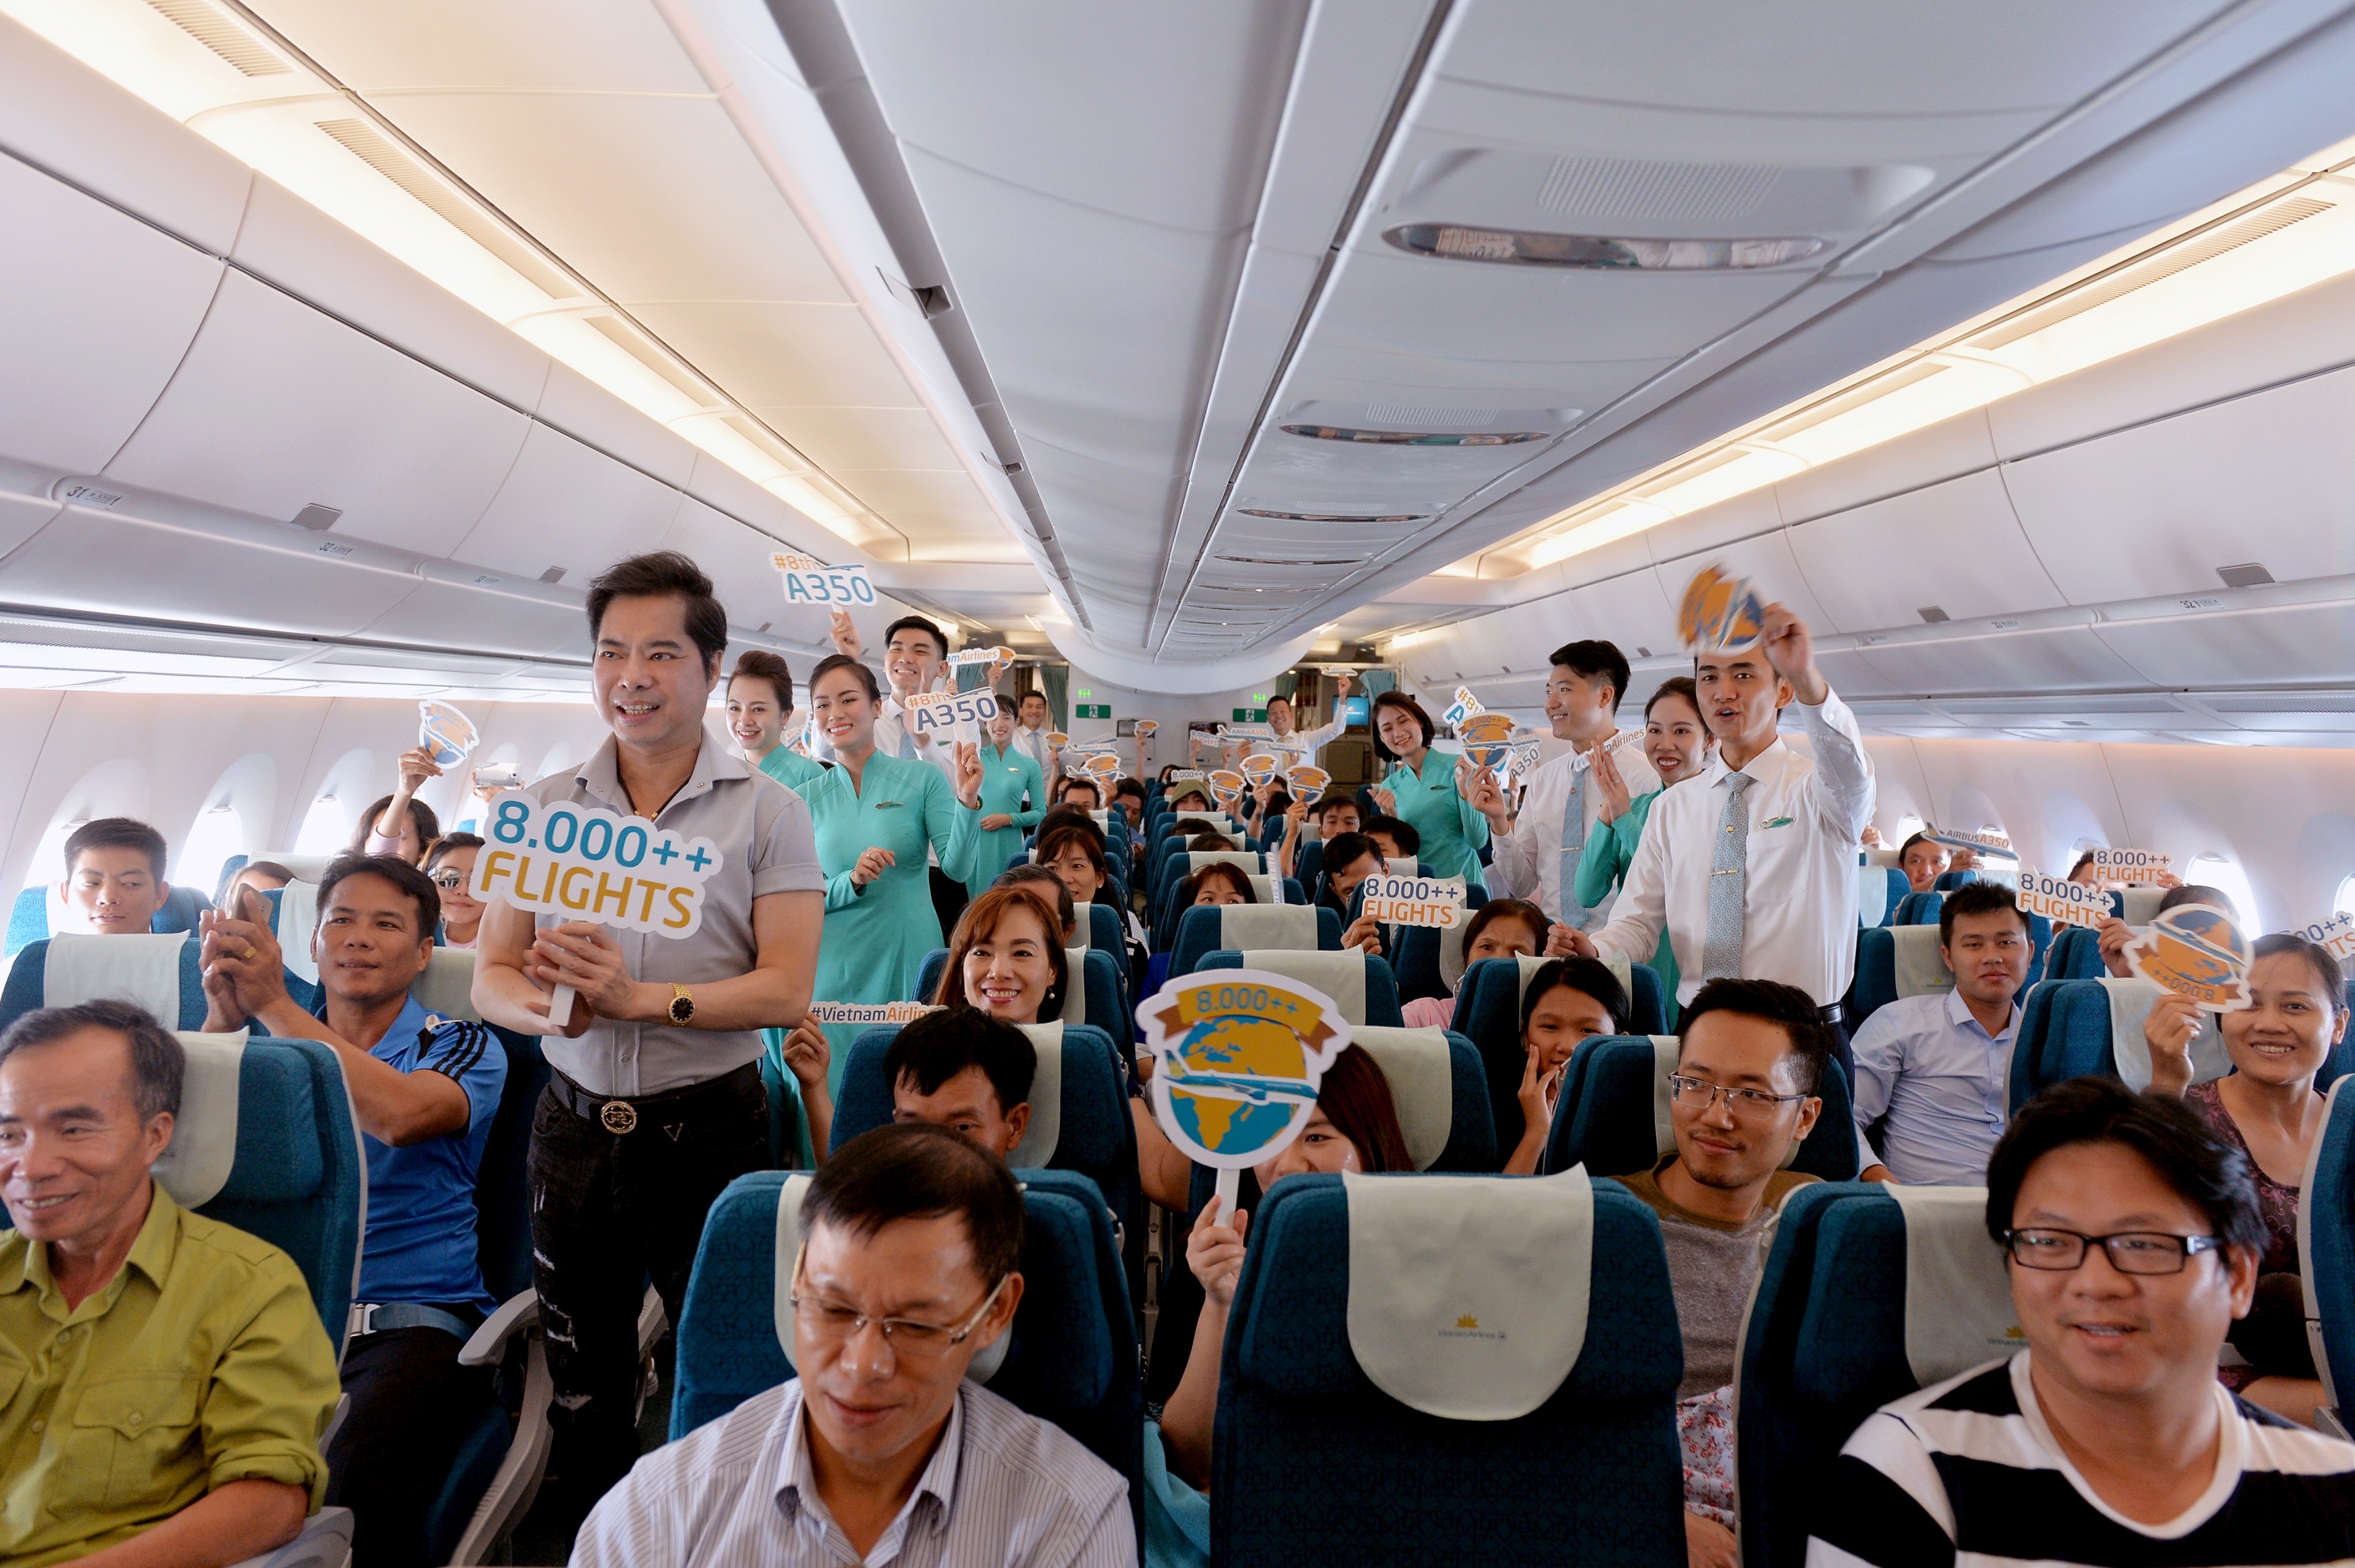 hanh khach Vietnam Airlines di may bay Airbus A350 anh 8